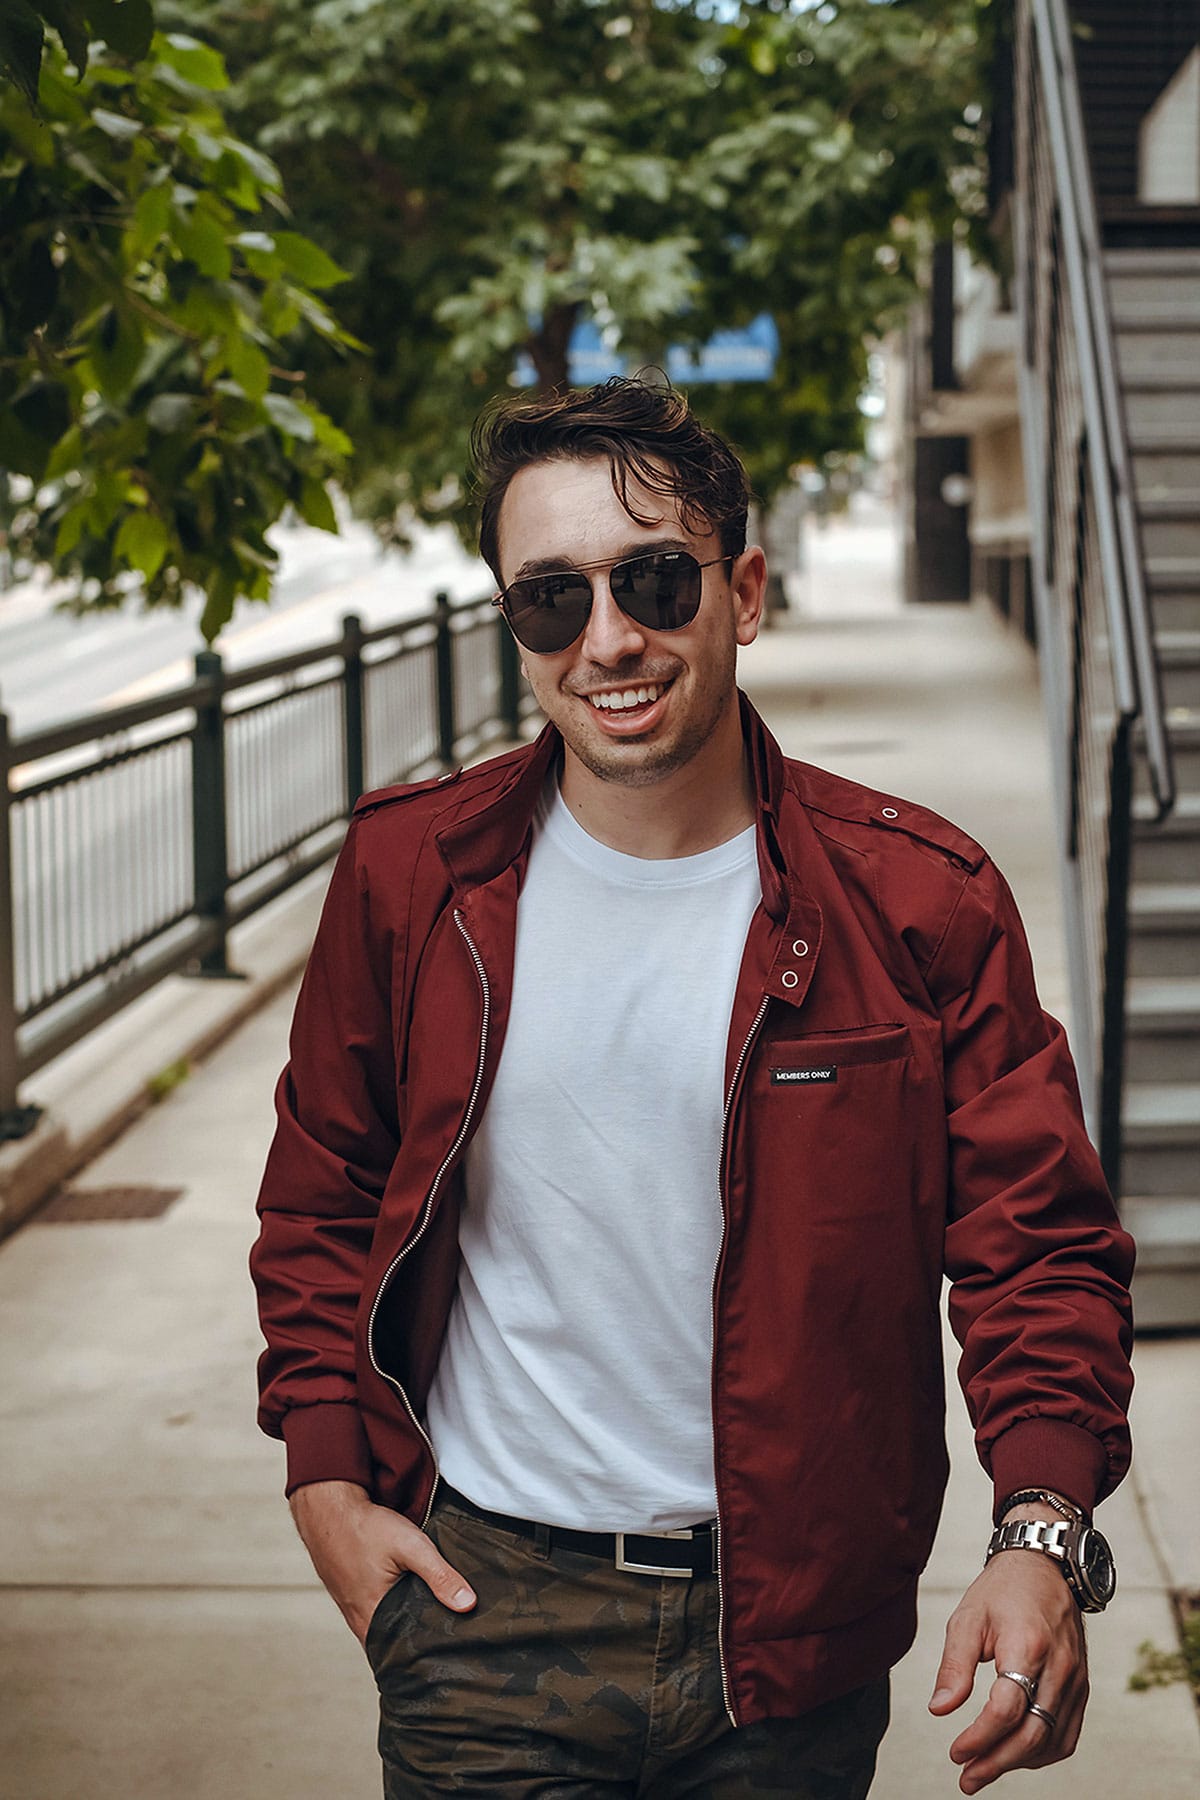 https://www.themodestman.com/wp-content/uploads/2021/08/6-David-wearing-a-red-bomber-jacket.jpg